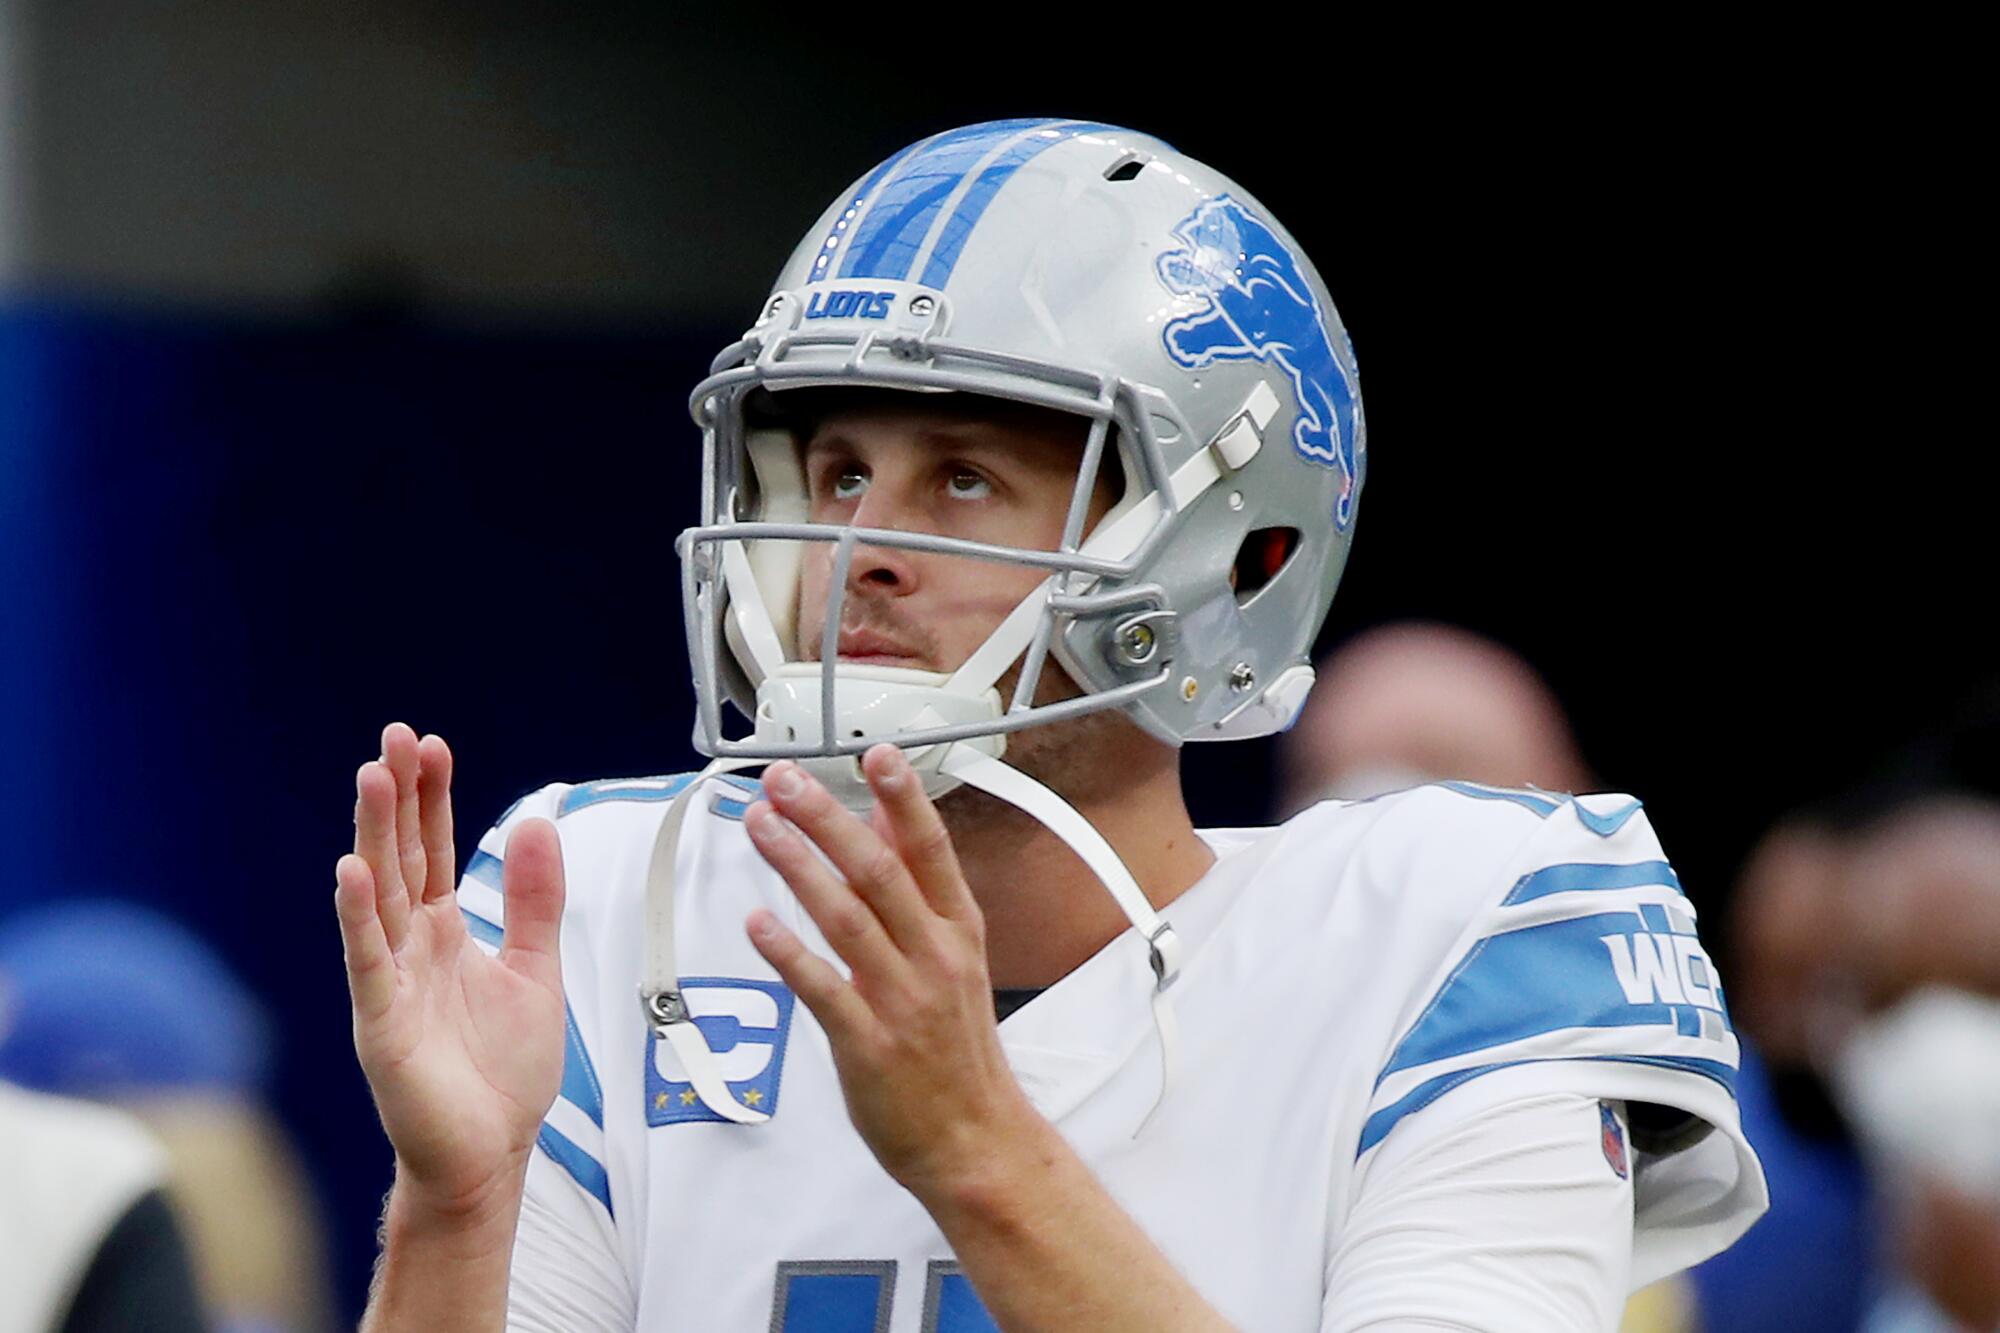 Breaking news: Following a prolonged contract dispute, Detroit Lions’ QB Jared Goff announces…